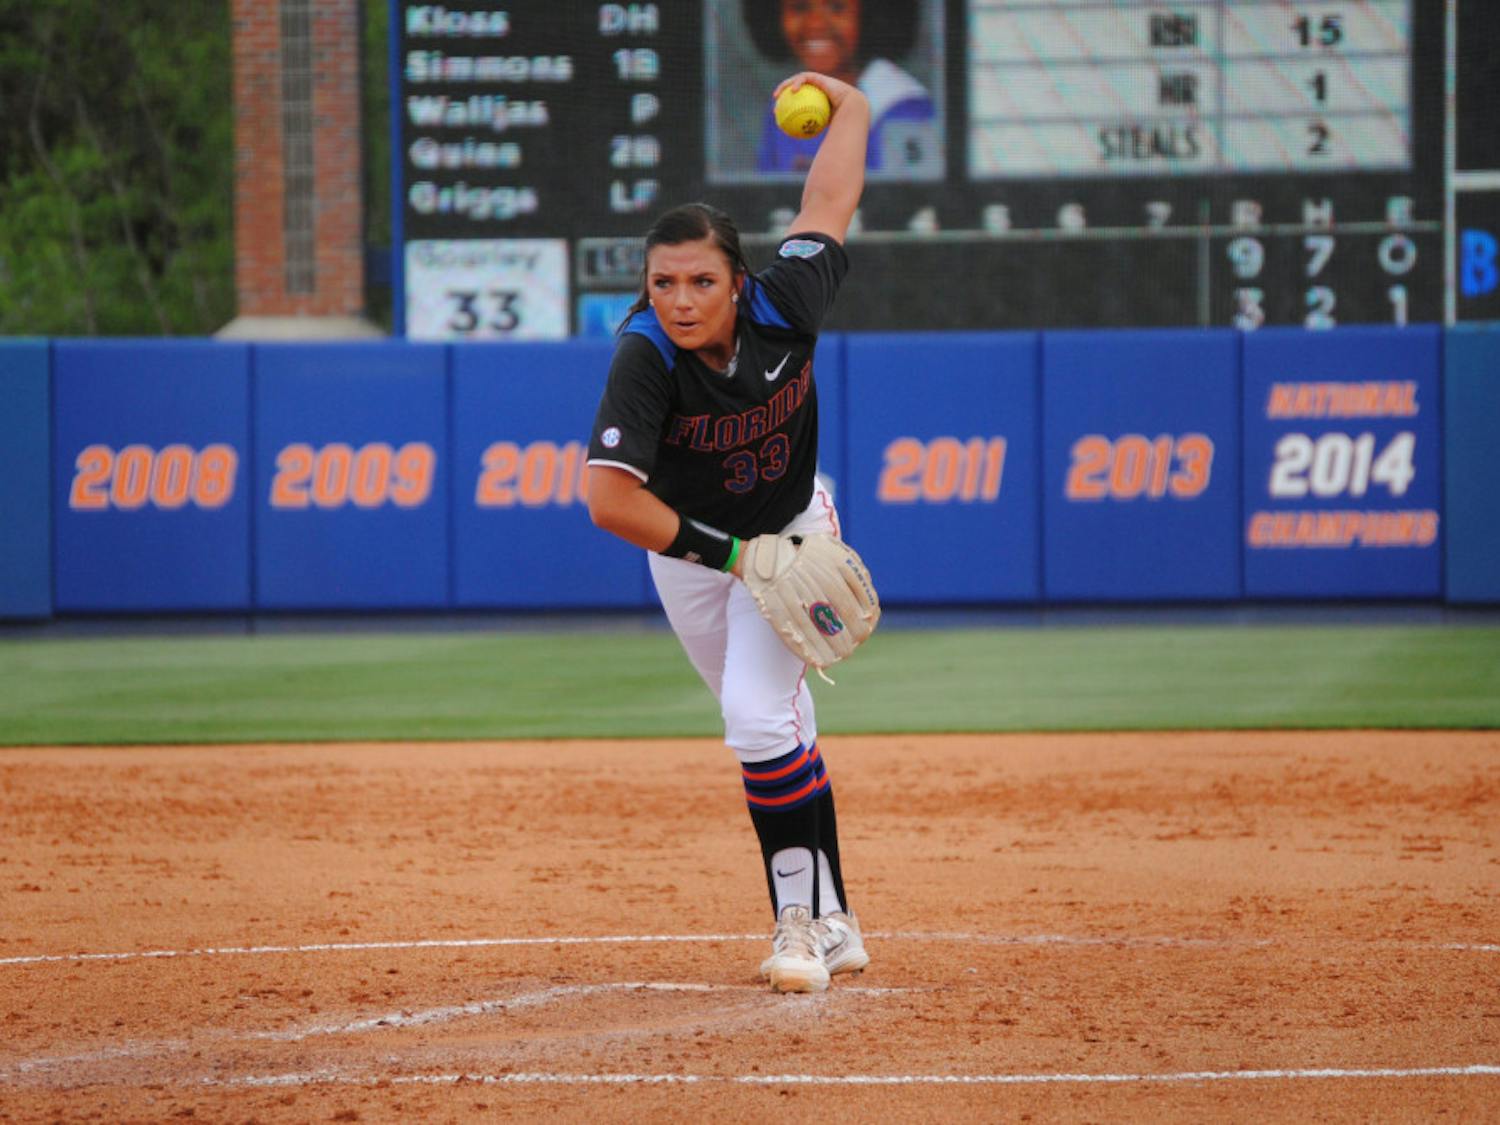 Delanie Gourley pitches during Florida's 14-10 loss to LSU on March 14, 2015, at Katie Seashole Pressly Stadium.